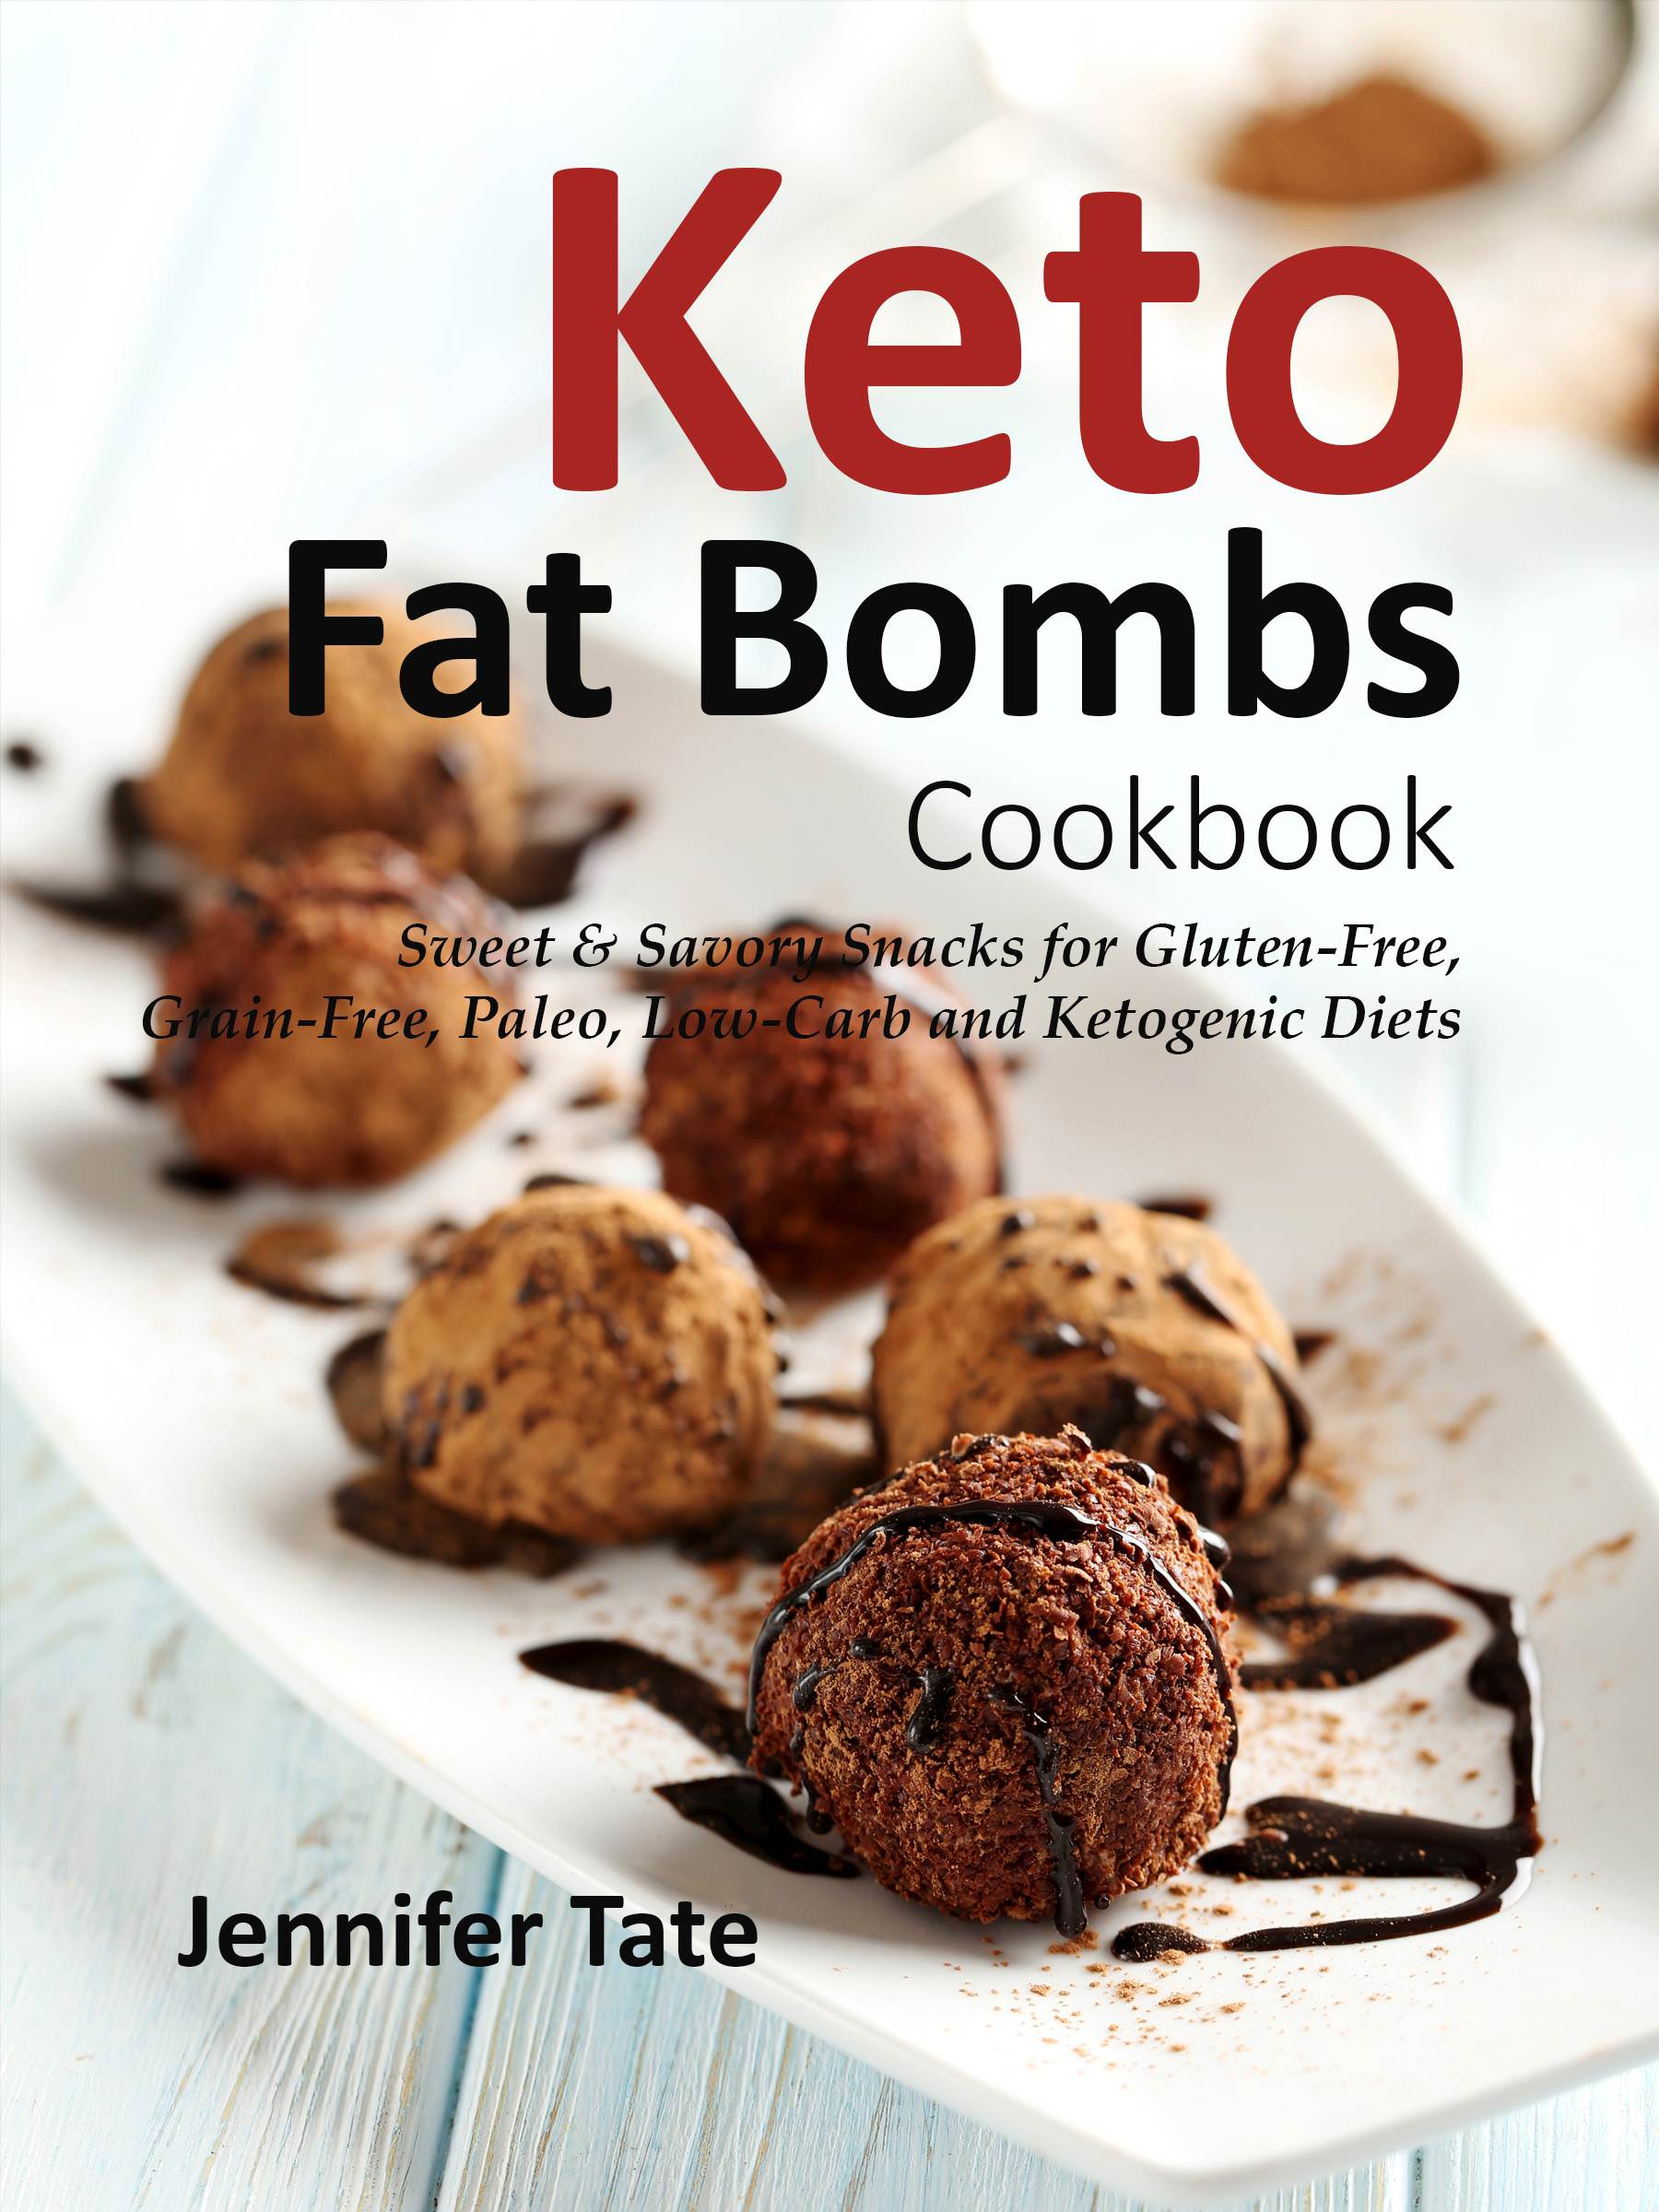 FREE: Fat Bombs Cookbook: Sweet & Savory Snacks for Gluten-Free, Grain-Free, Paleo, Low-Carb and Ketogenic Diets by Jennifer Tate